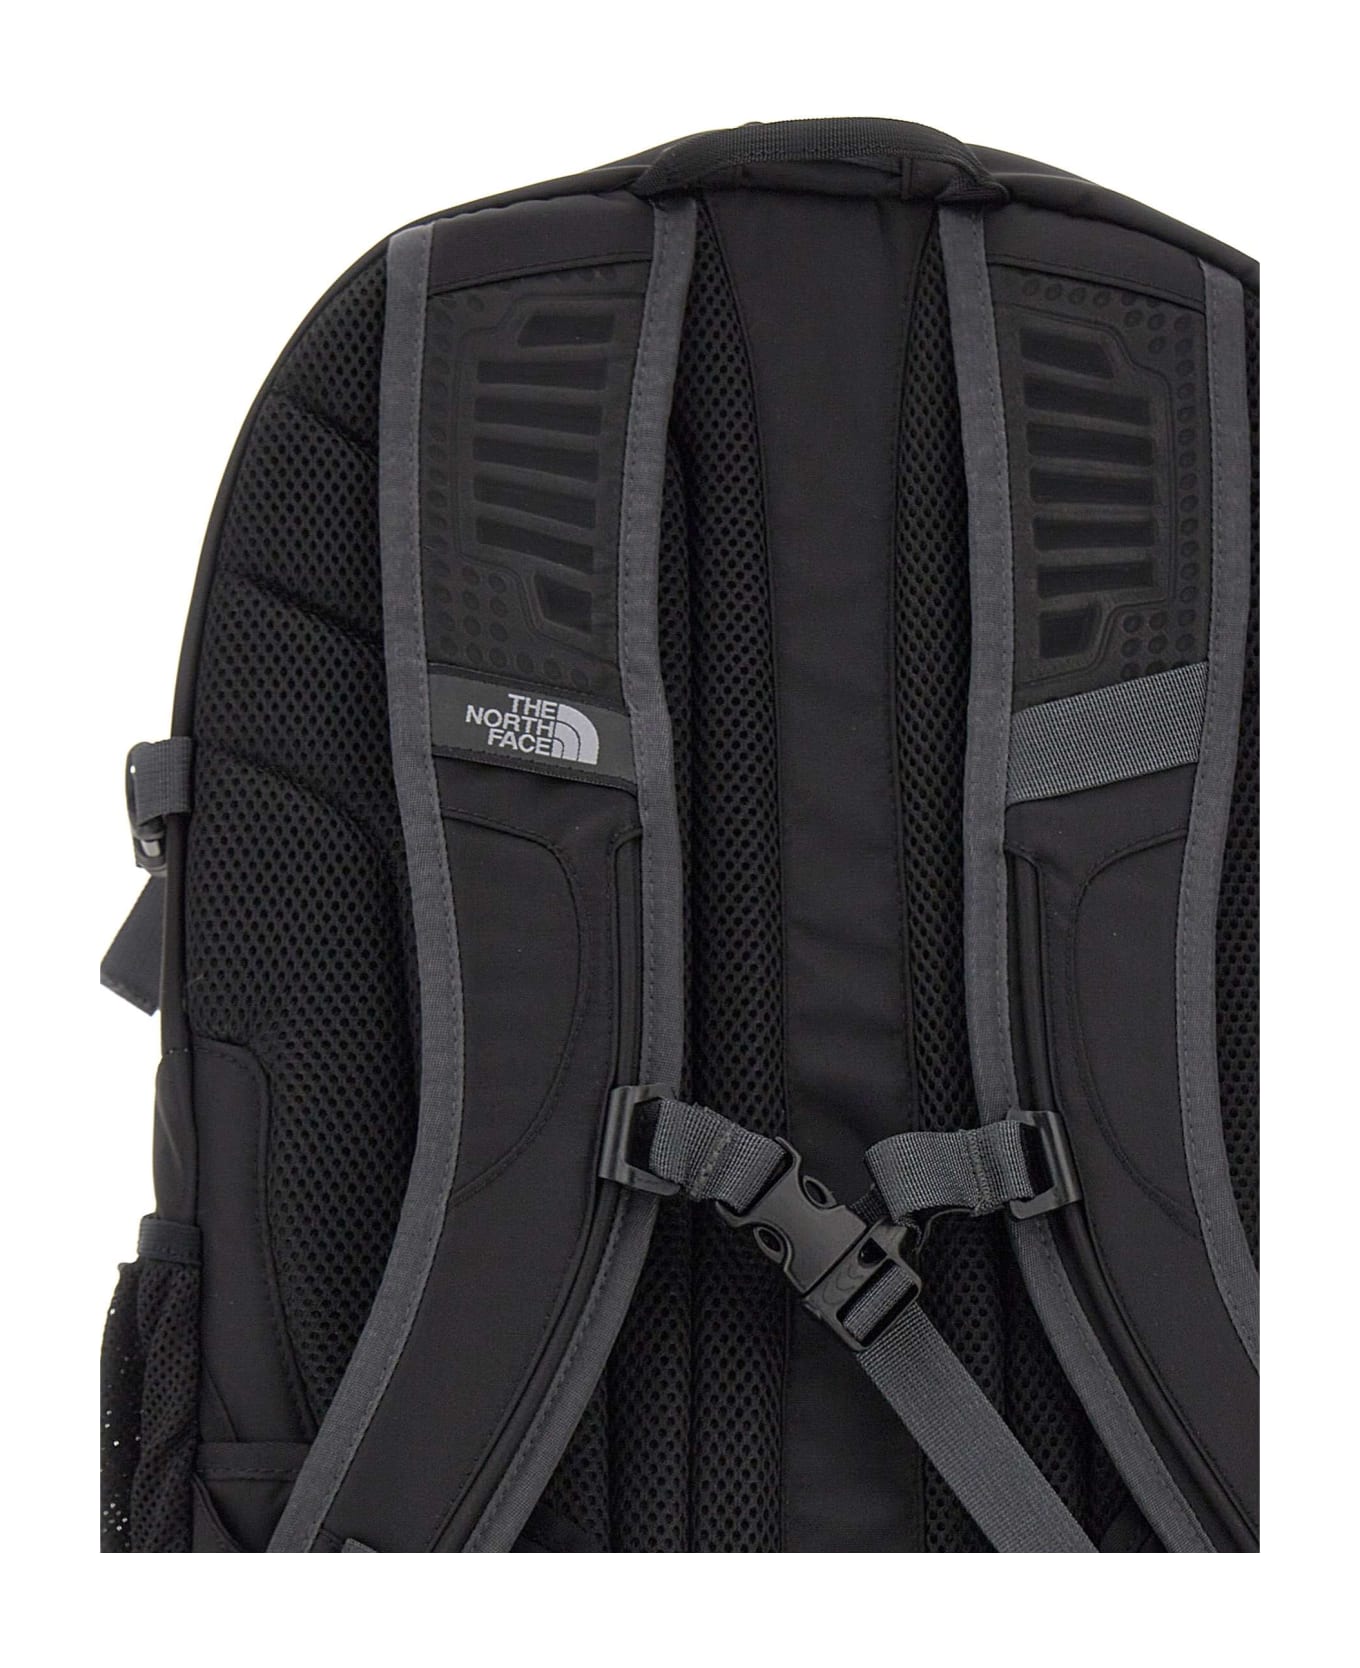 The North Face "borealis Classic" Backpack - BLACK